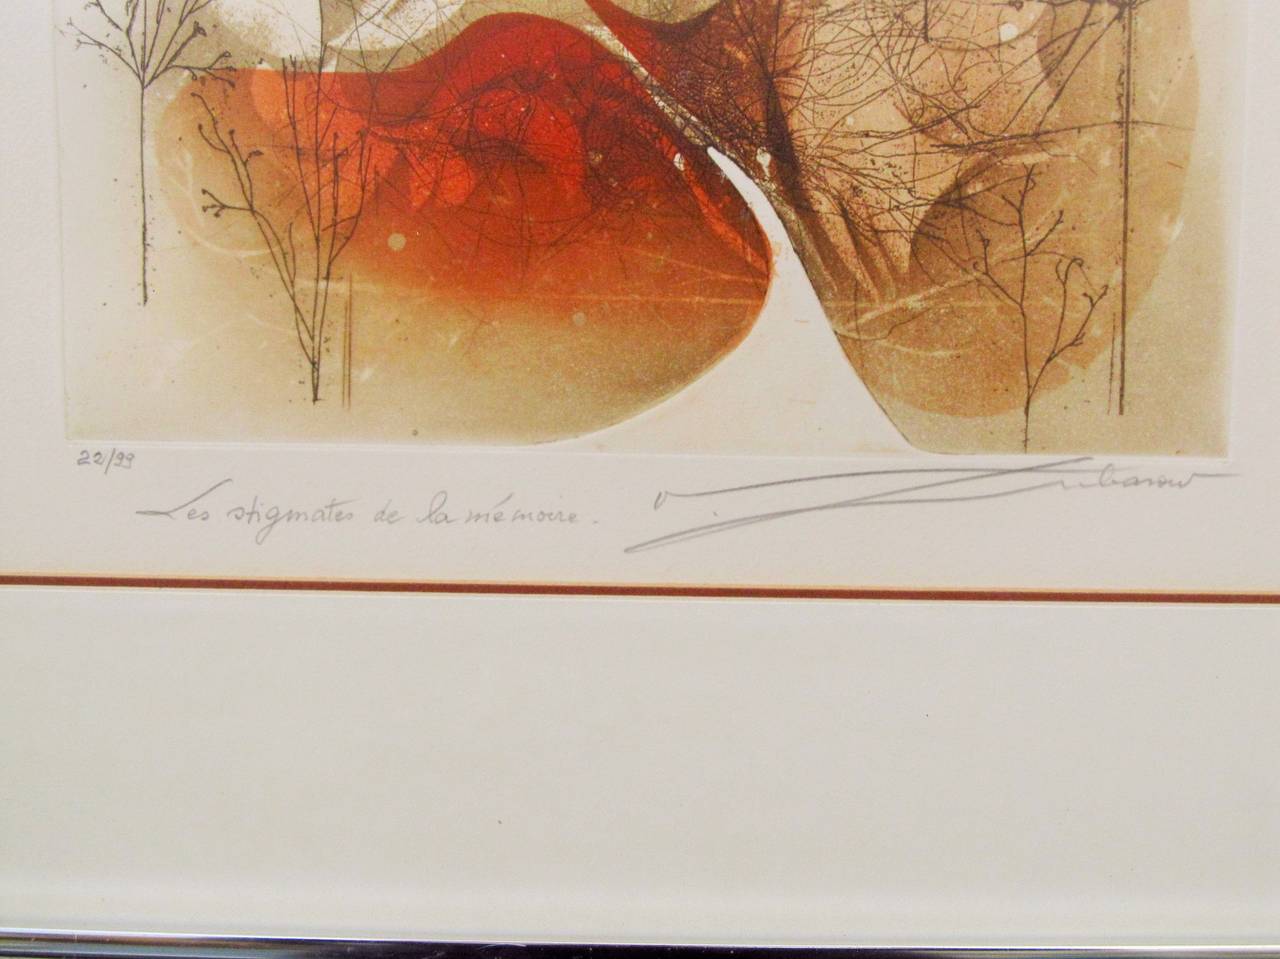 An evocative aquatint print by French artist Renee Lubarow numbered 22/99. The plate mark measures 14